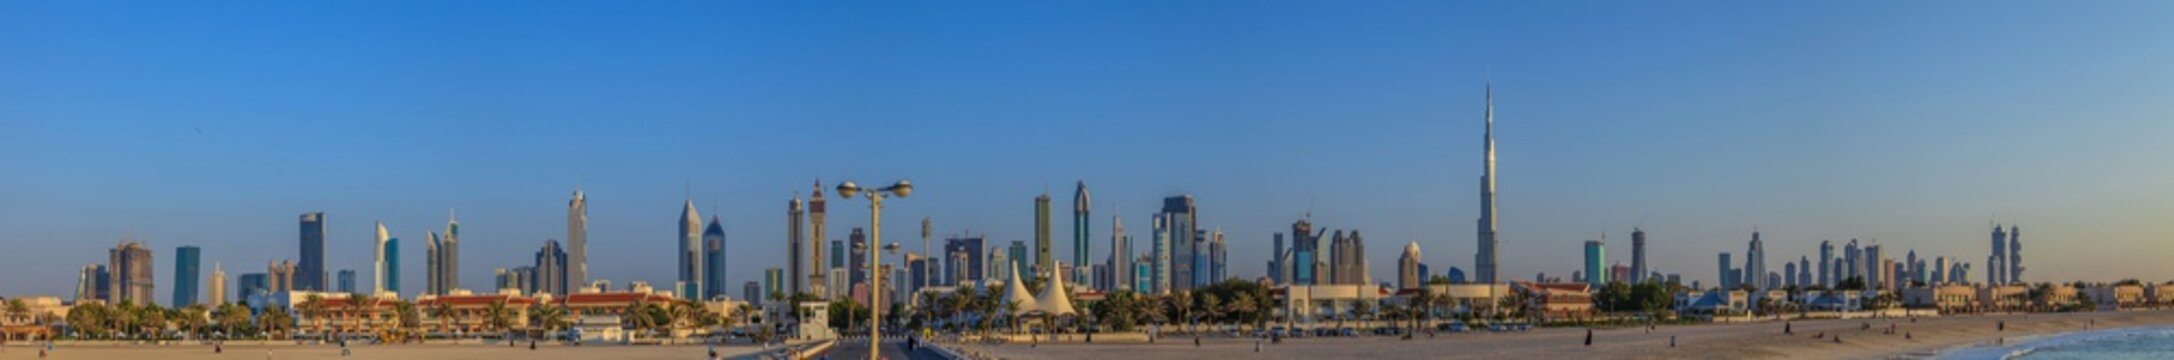 Panoramic picture of the Dubai skyline during daytime